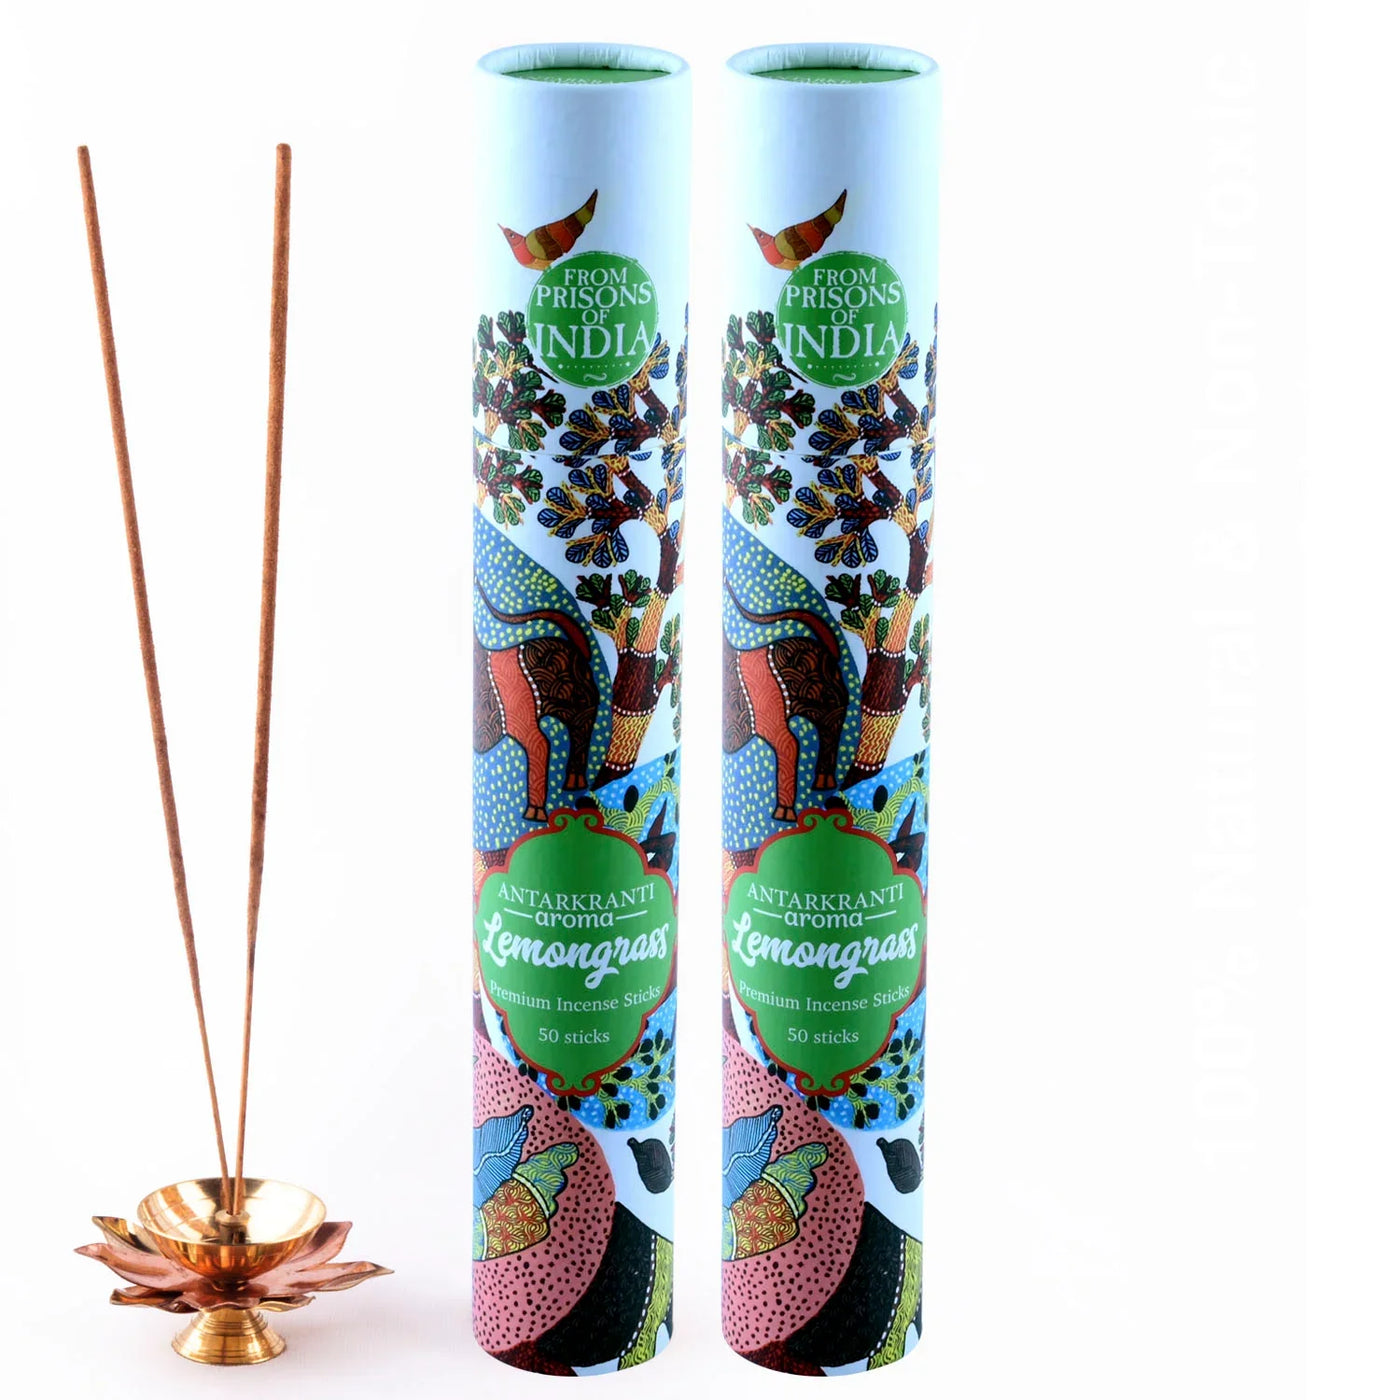 Sacred Life Incense Sticks - Value for Price Combo Pack of 4 - PRISONS OF INDIA